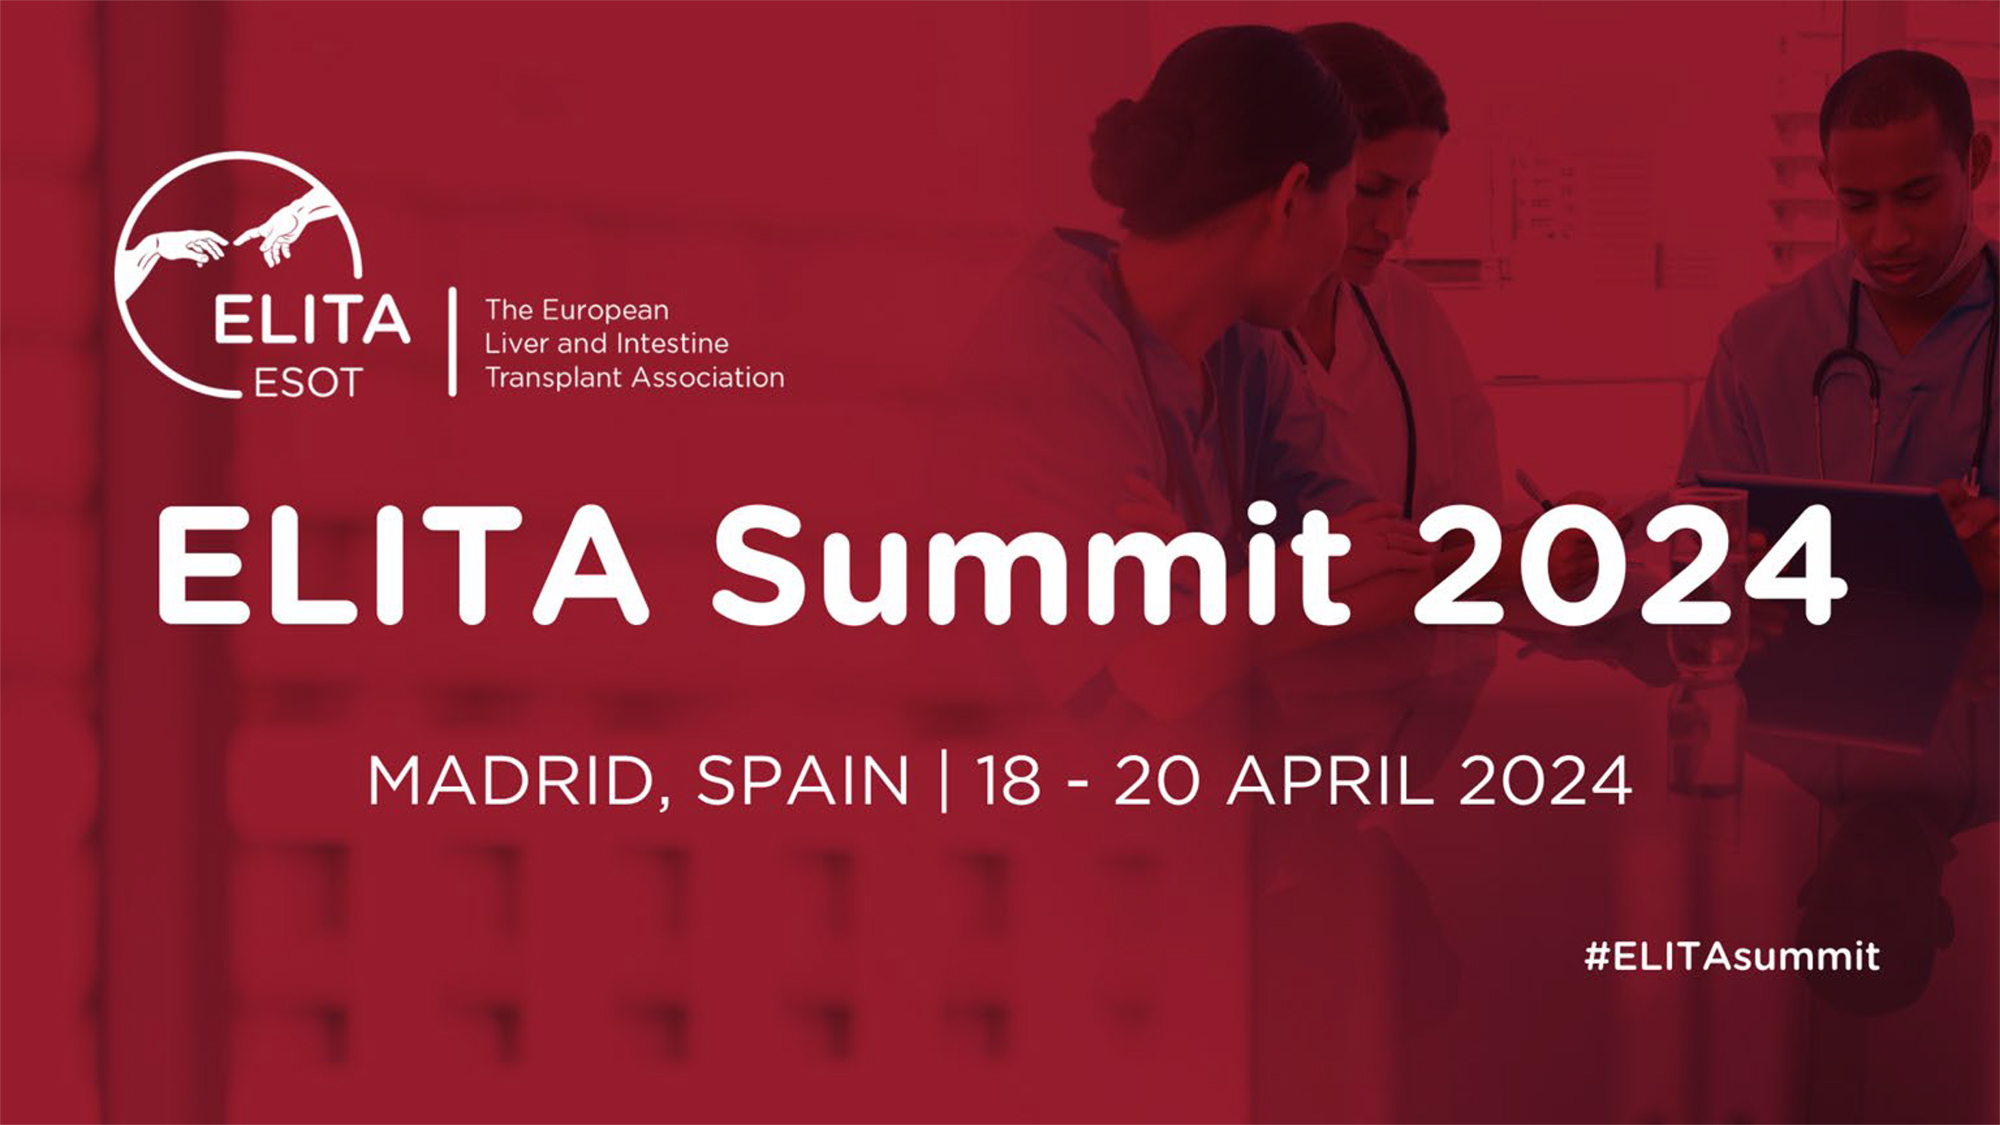 Interim results from the CHANCE study presented at ELITA Summit 2024